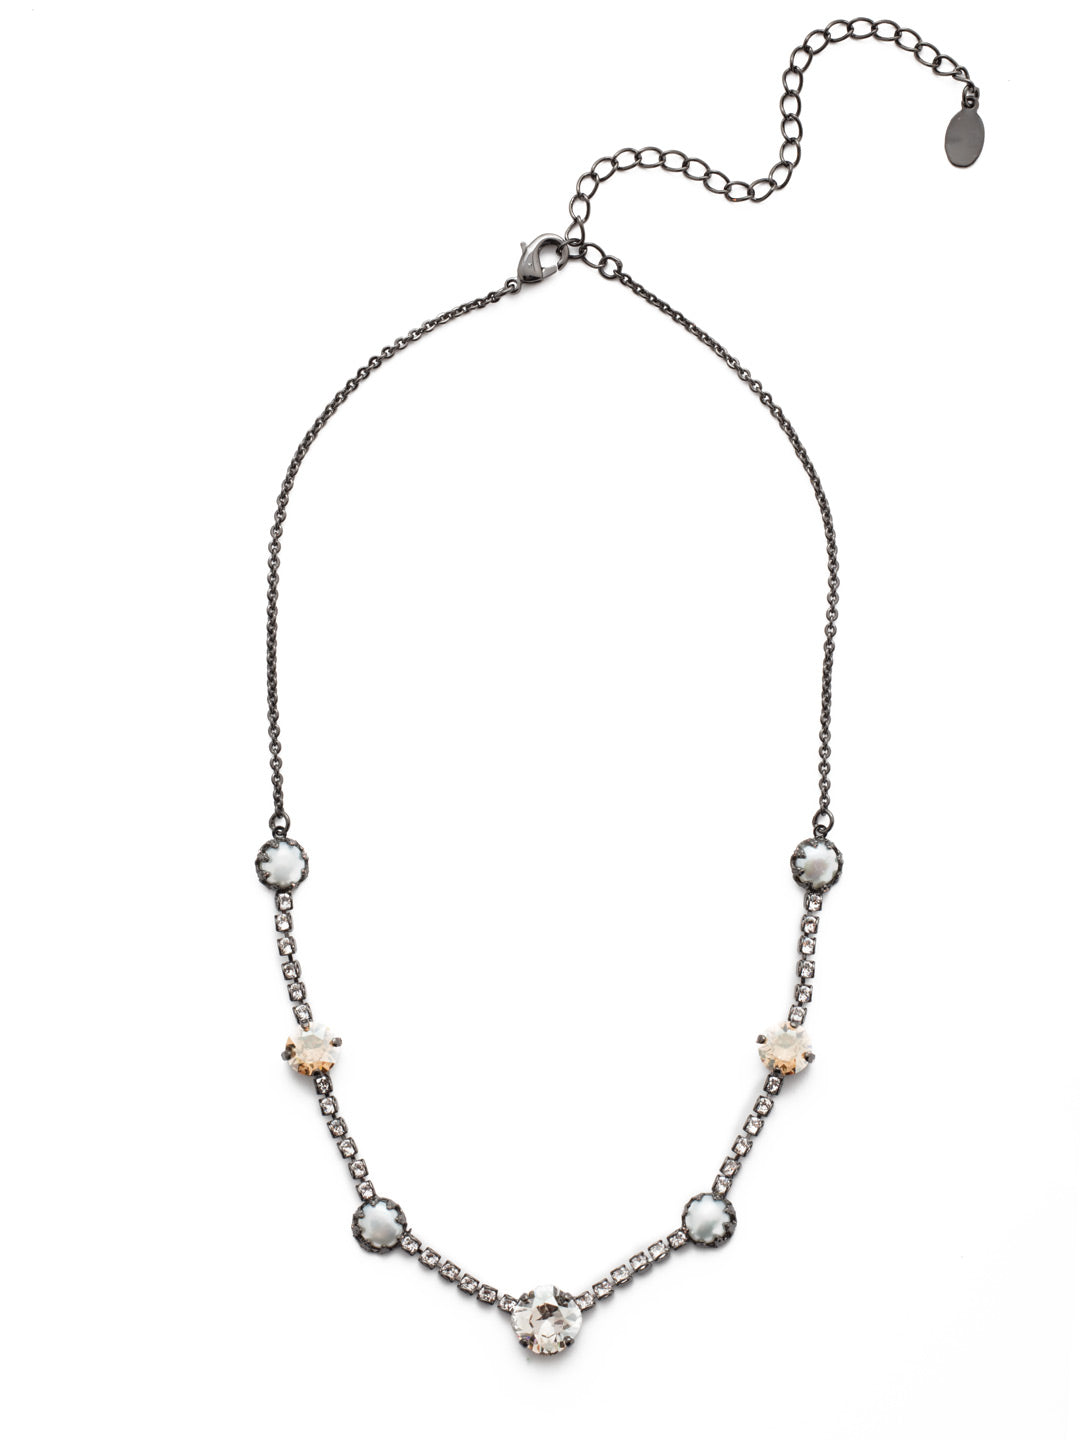 Caterina Tennis Necklace - NES11GMGNS - <p>Our Caterina Tennis Necklace is traditional style plus something extra with links of sparkling crystals bringing together bigger, bolder stones and pretty pearls. From Sorrelli's Golden Shadow collection in our Gun Metal finish.</p>